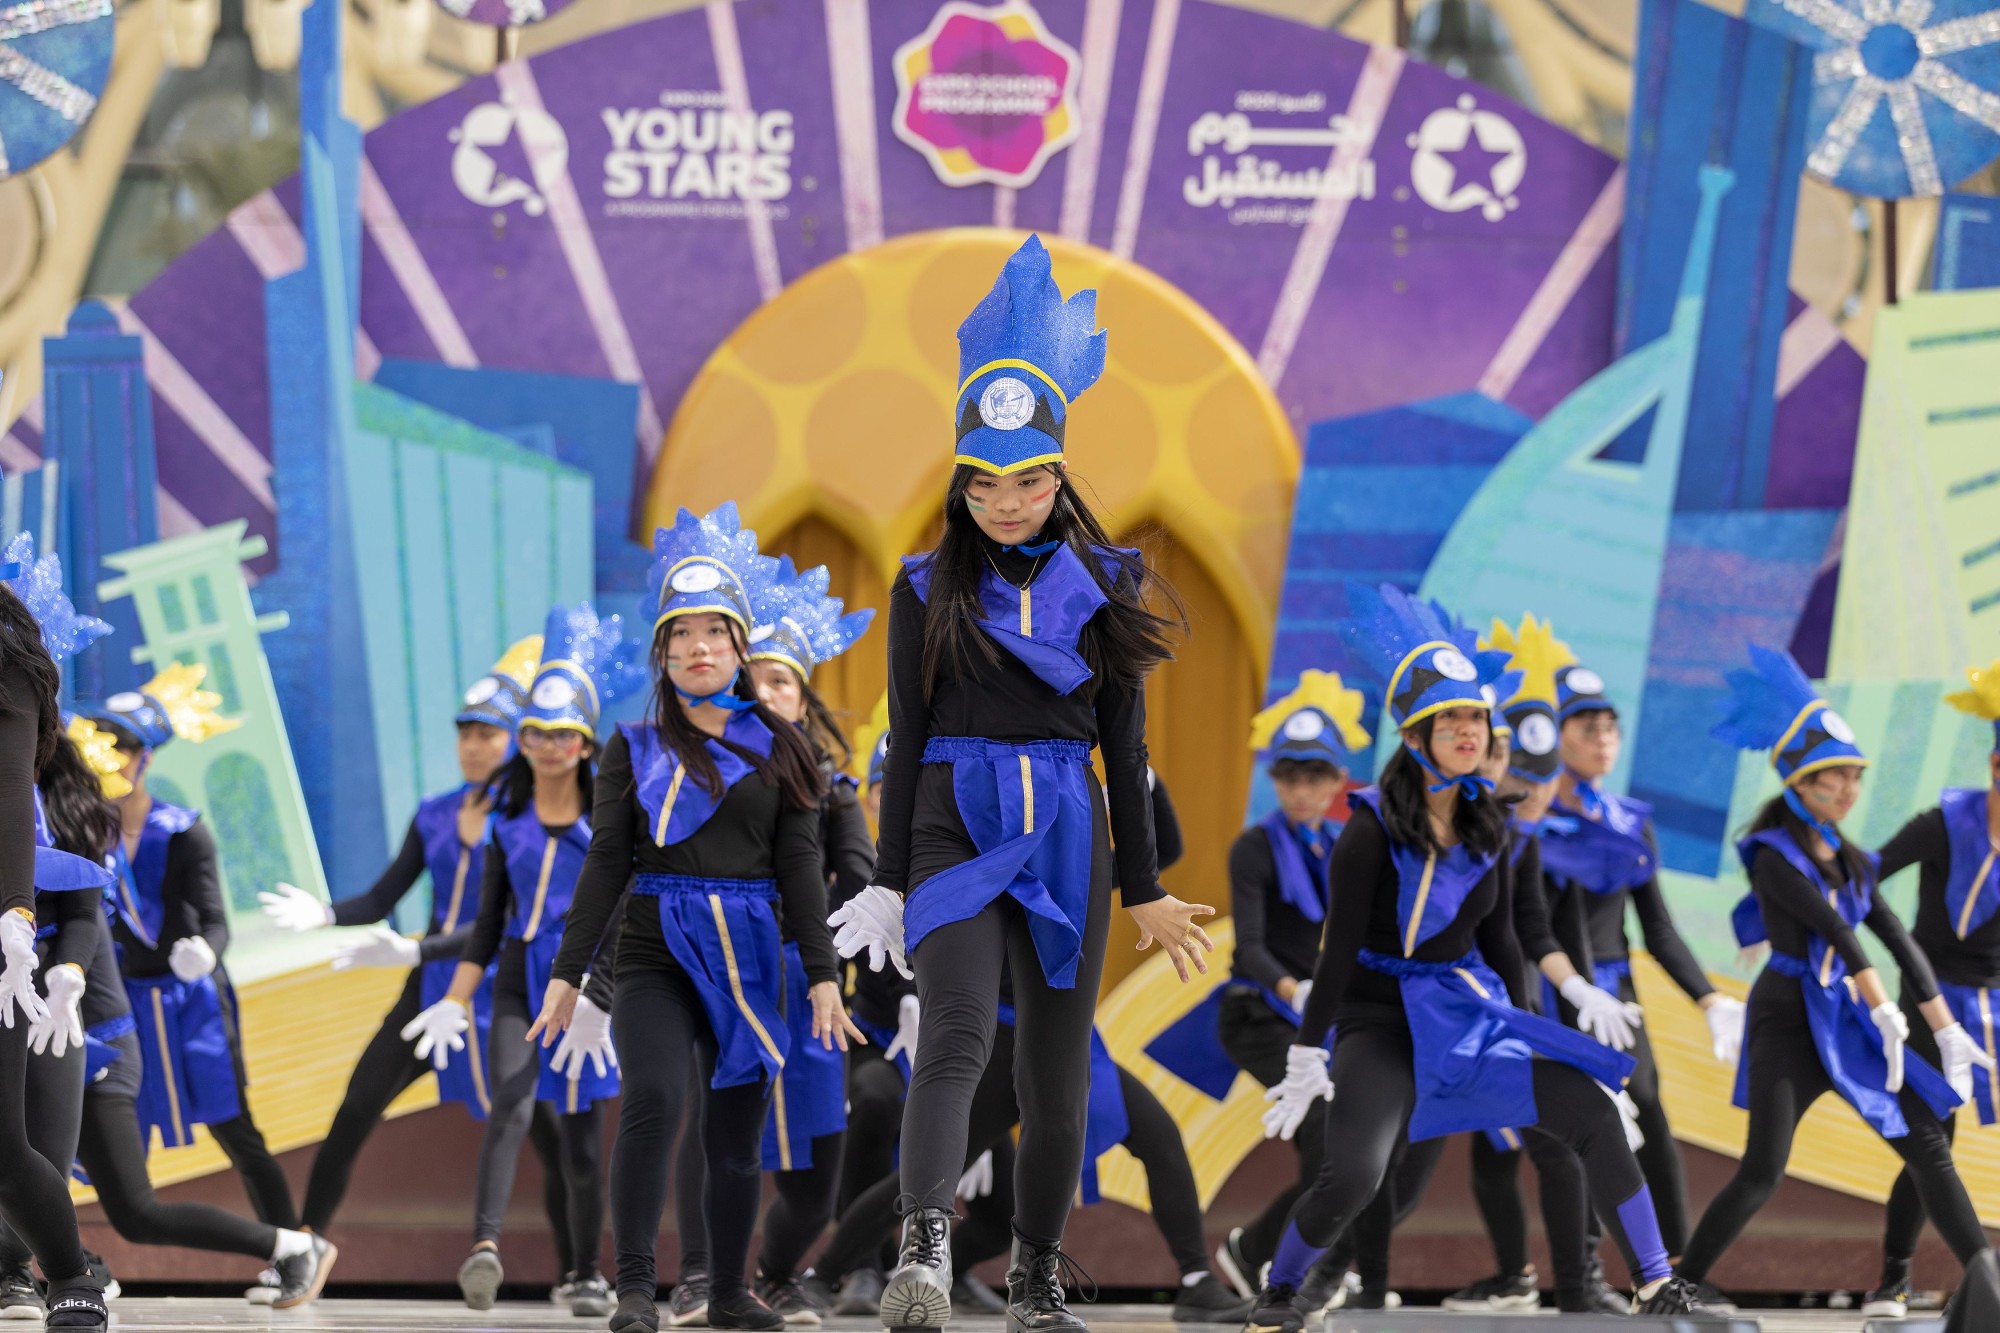 Far Eastern Private School, Halwan Campus, Sharjah perform during Expo Young Stars on Al Wasl Stage m56701